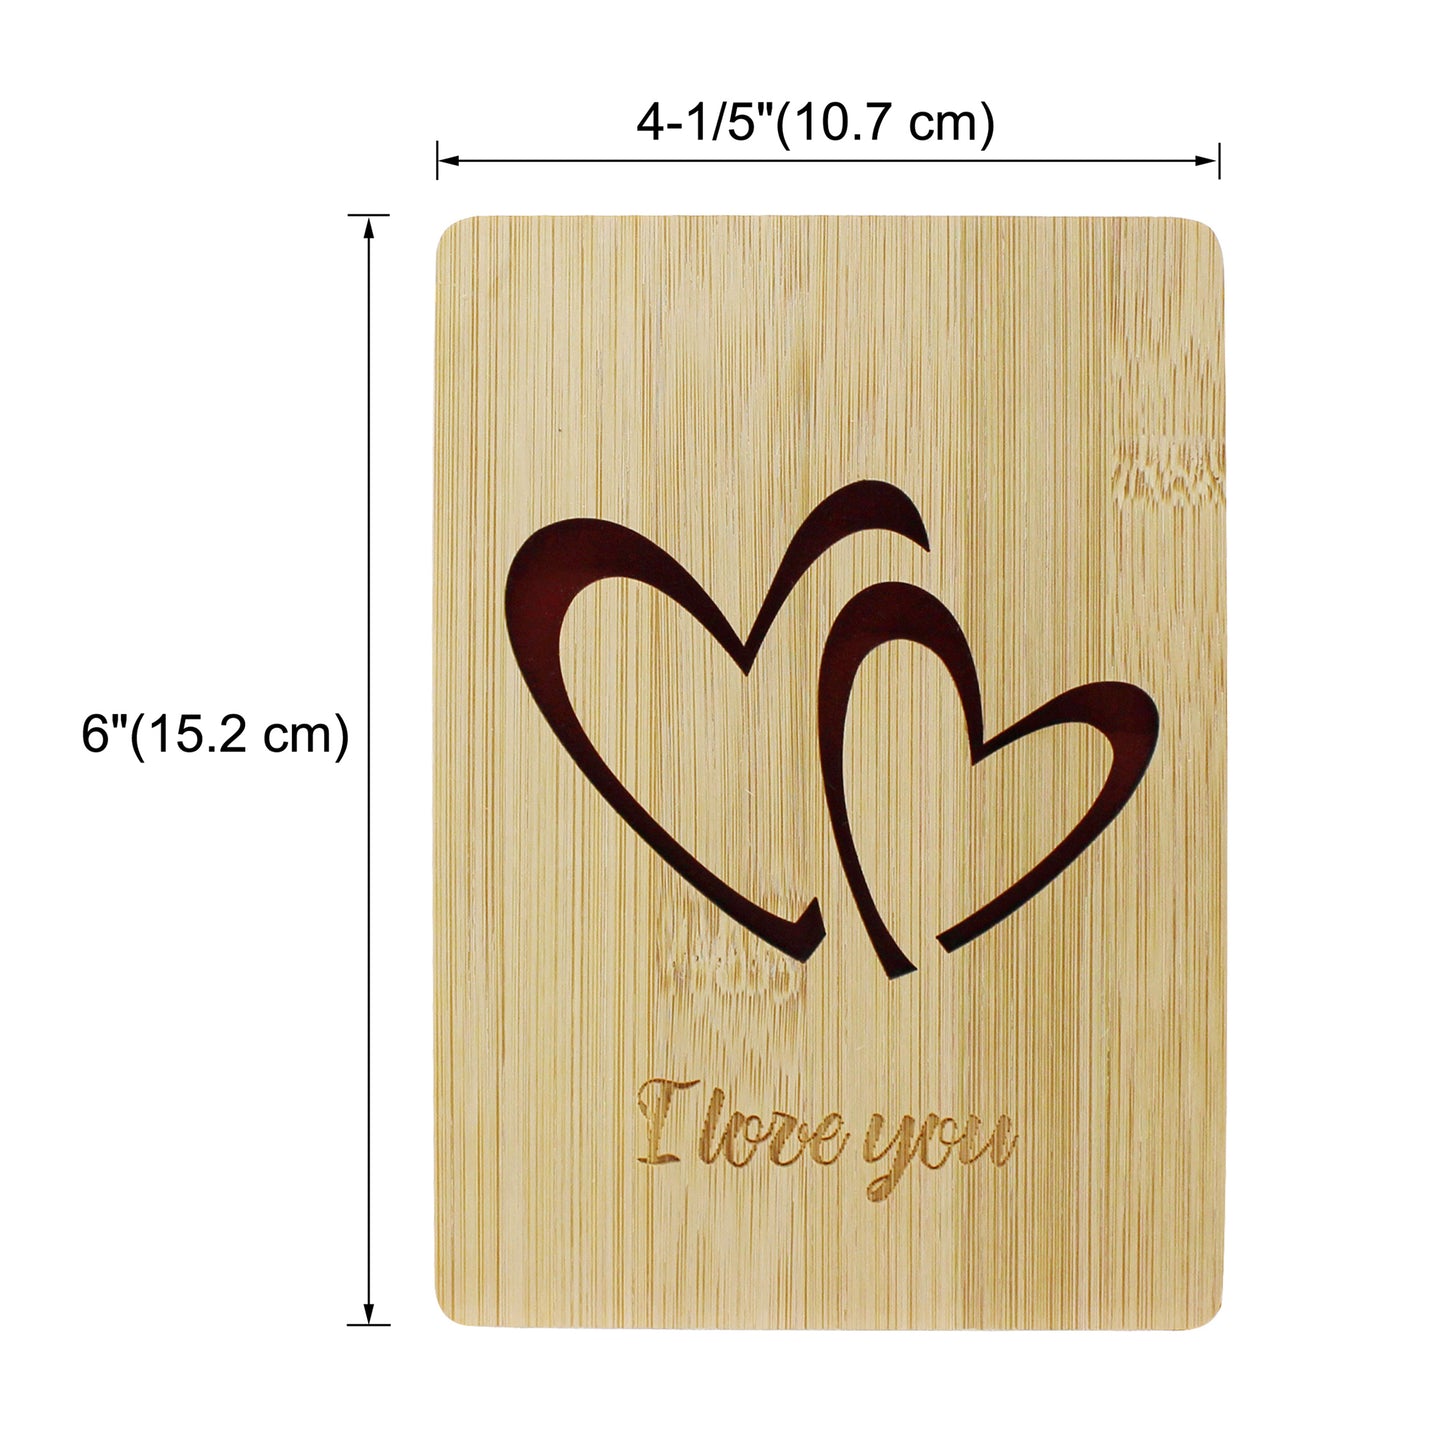 CVHOMEDECO. I Love You Card Greeting Cards Handmade with Natural Bamboo Wood, Idea Gifts for Wife, Him, Her or Just Because, Valentines Day Anniversary Birthdays Mother's Day Gift Card